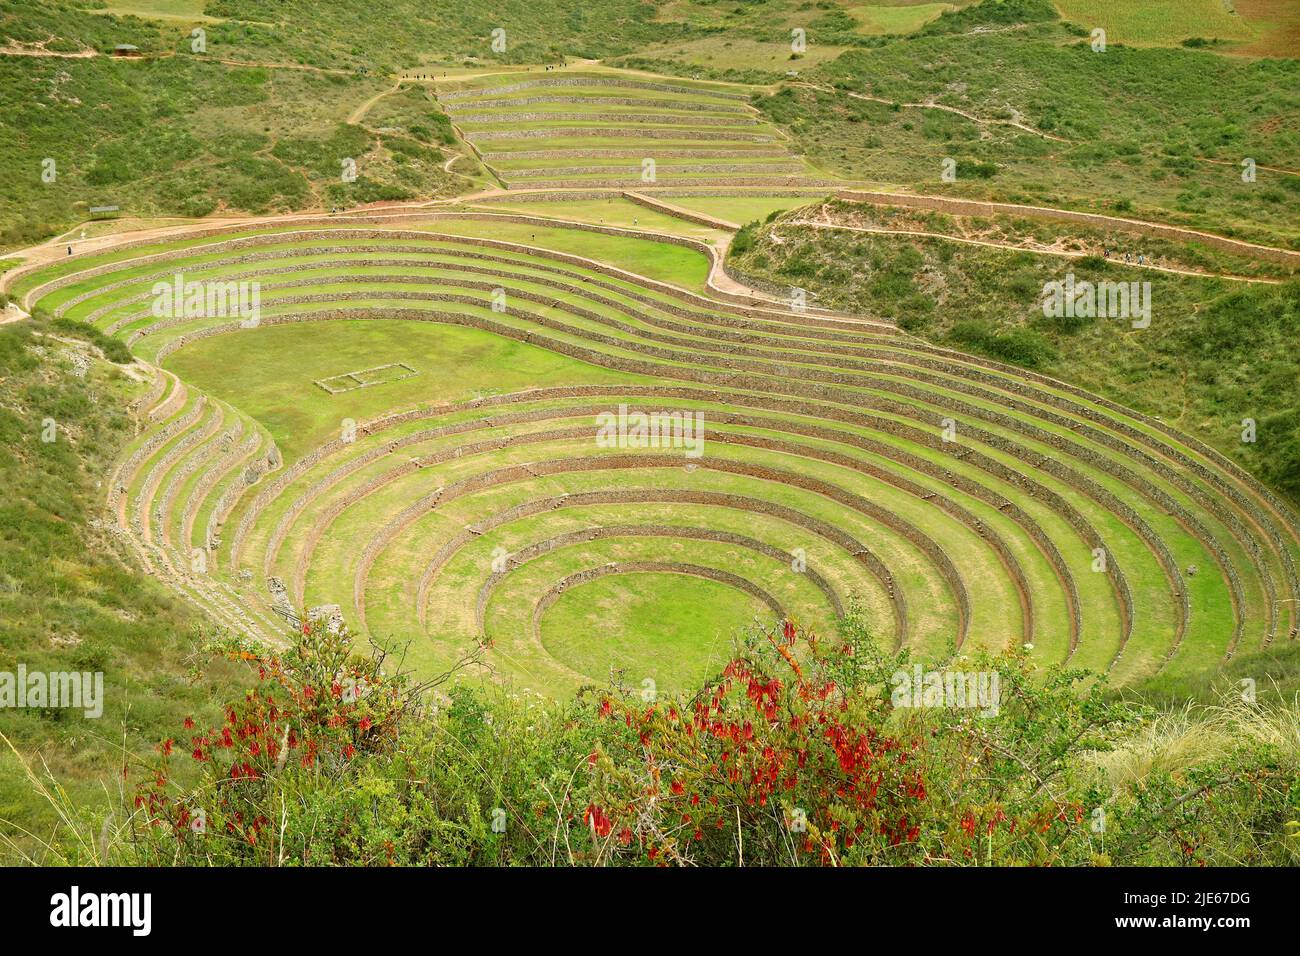 Historic Agricultural Terraces of Moray with Red Cantuta Flowers in Foreground,  Sacred Valley of the Incas, Cusco Region, Peru, South America Stock Photo